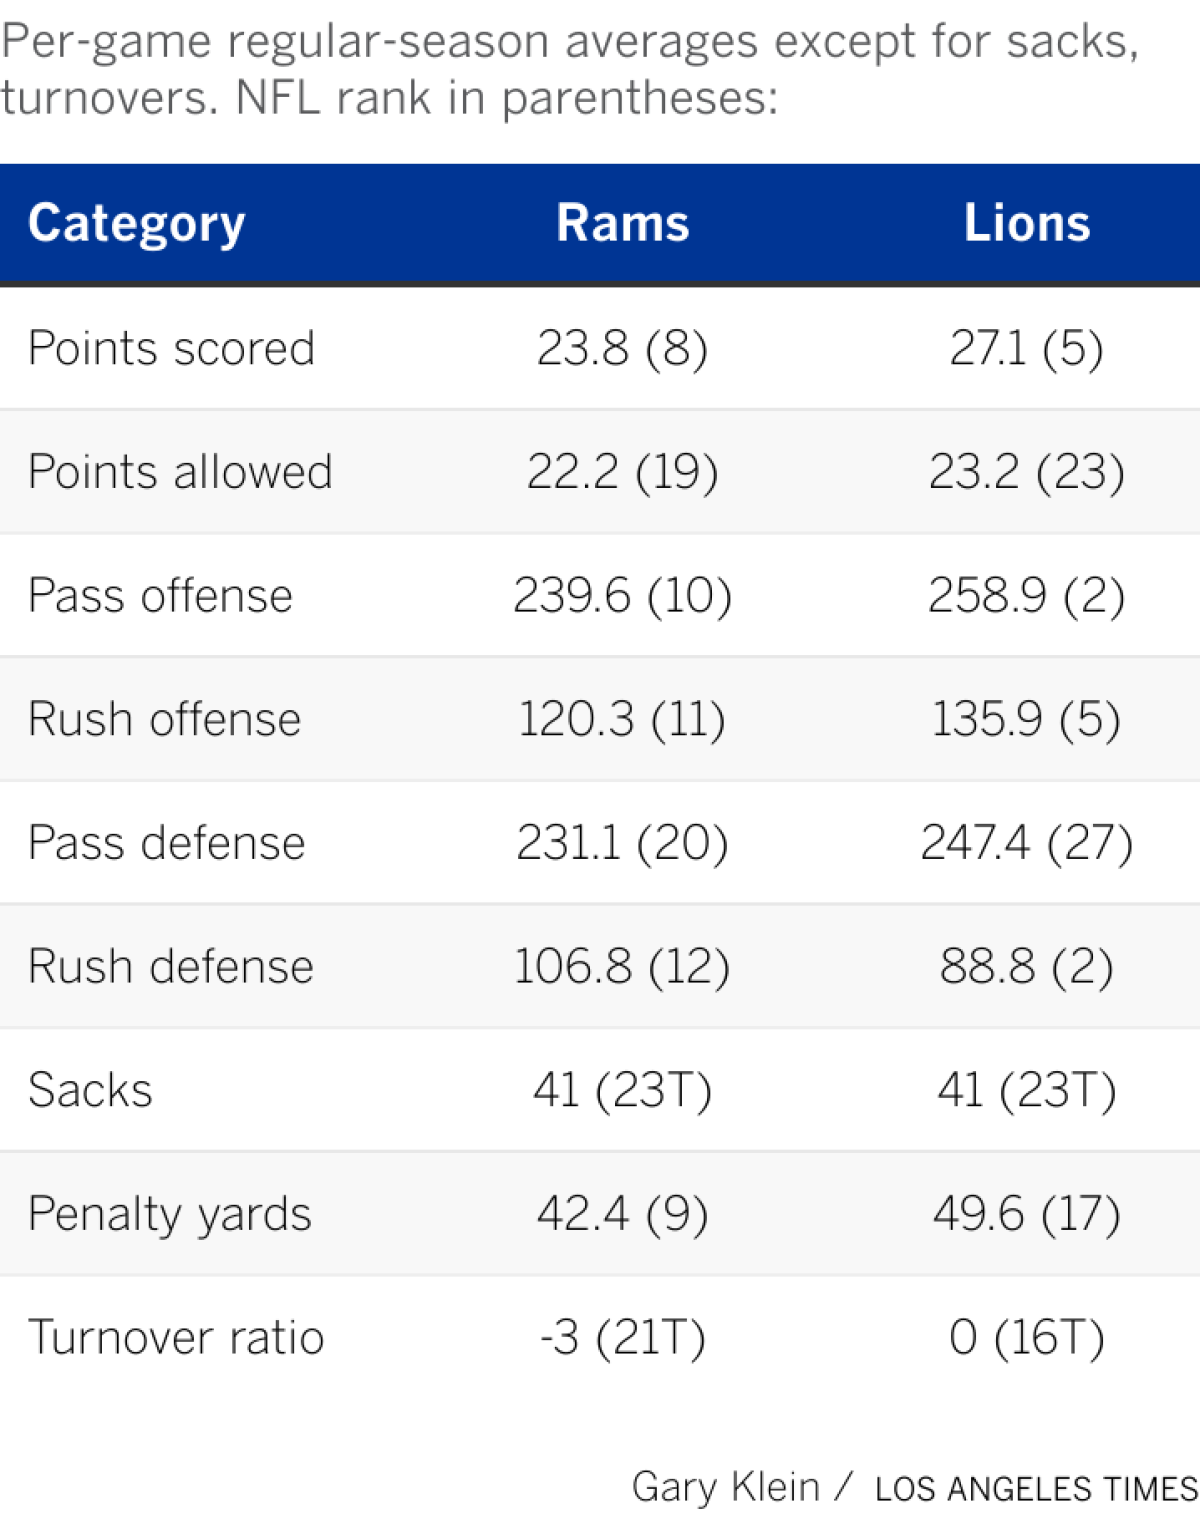 Breaking down the top team statistics for both the Rams and the Lions.